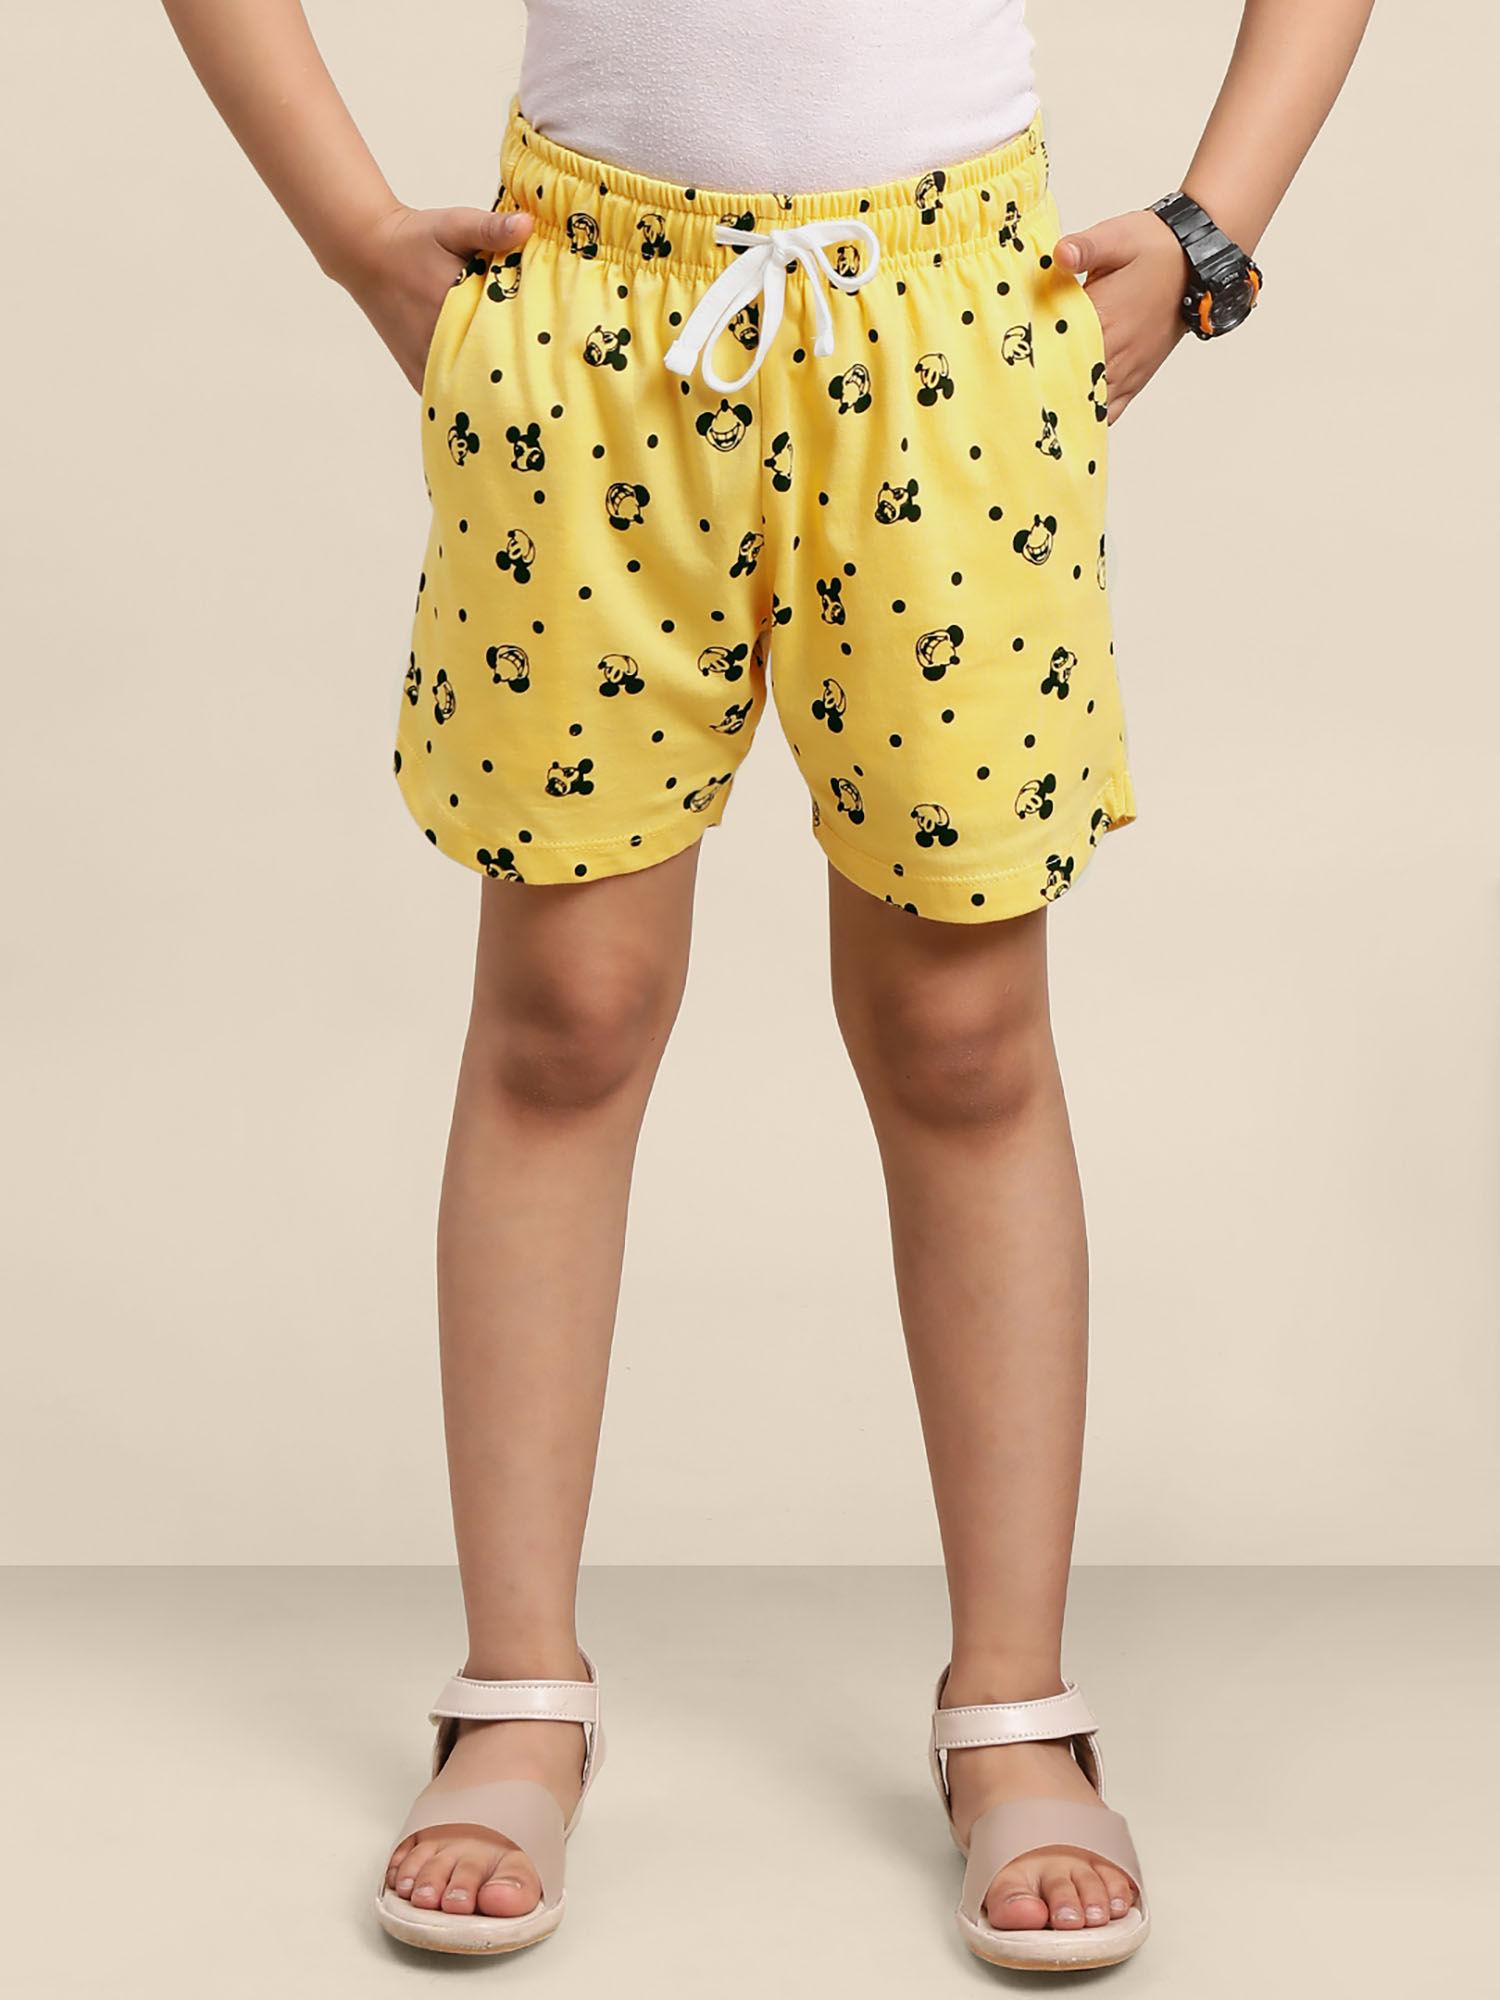 mickey & friends printed shorts for girls